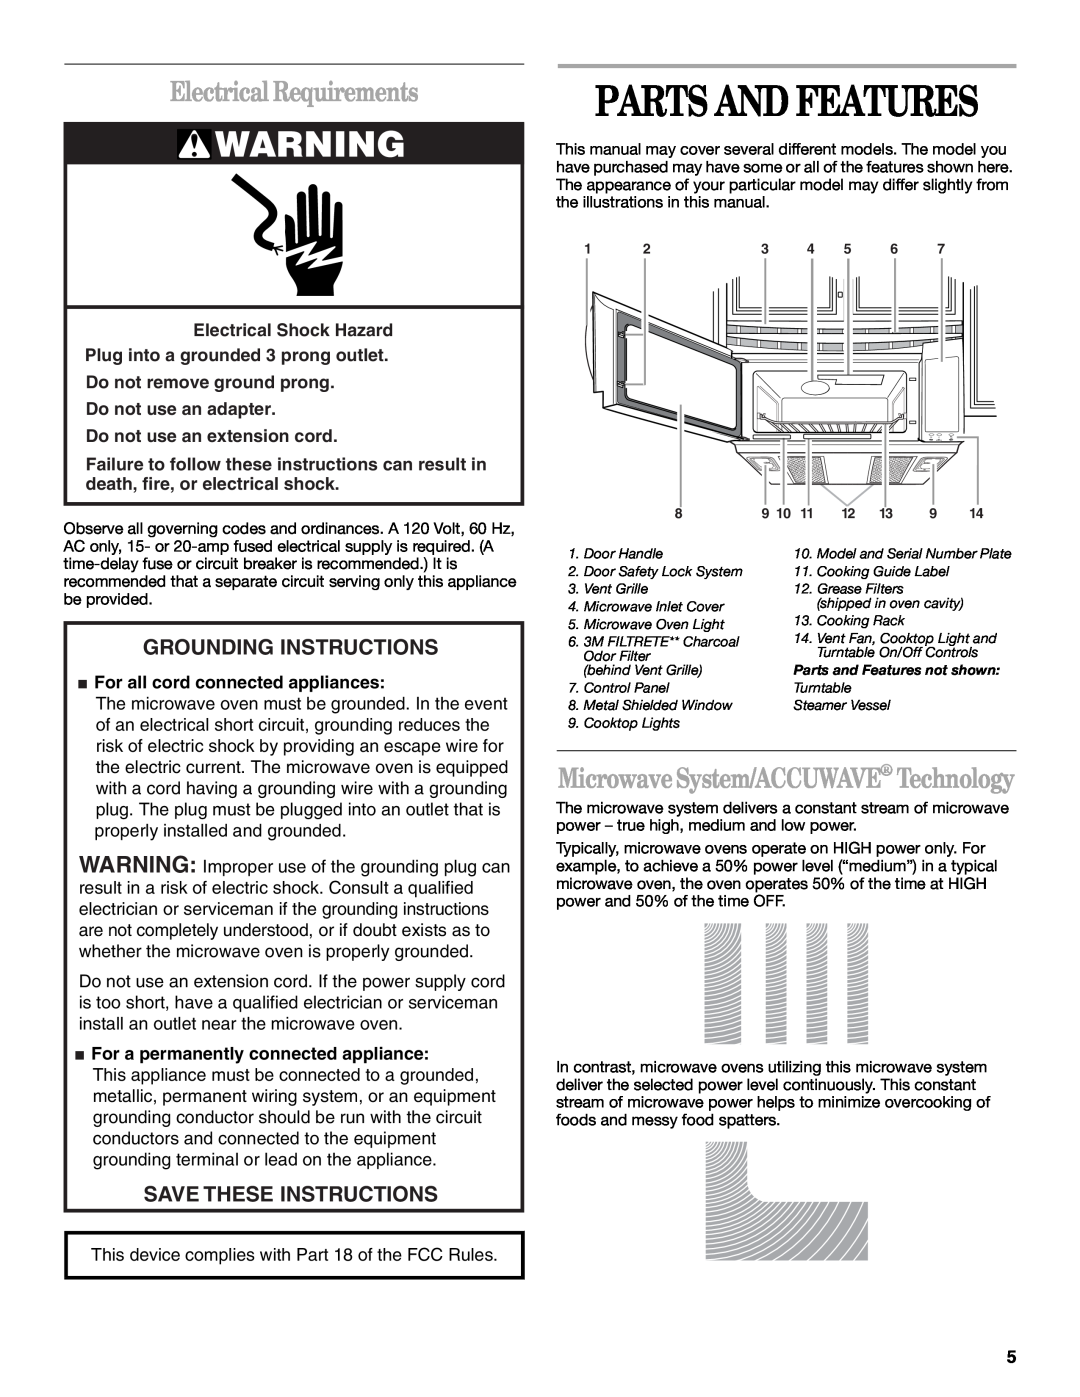 Whirlpool GH9176XM manual Parts And Features, Electrical Requirements, Grounding Instructions, Save These Instructions 